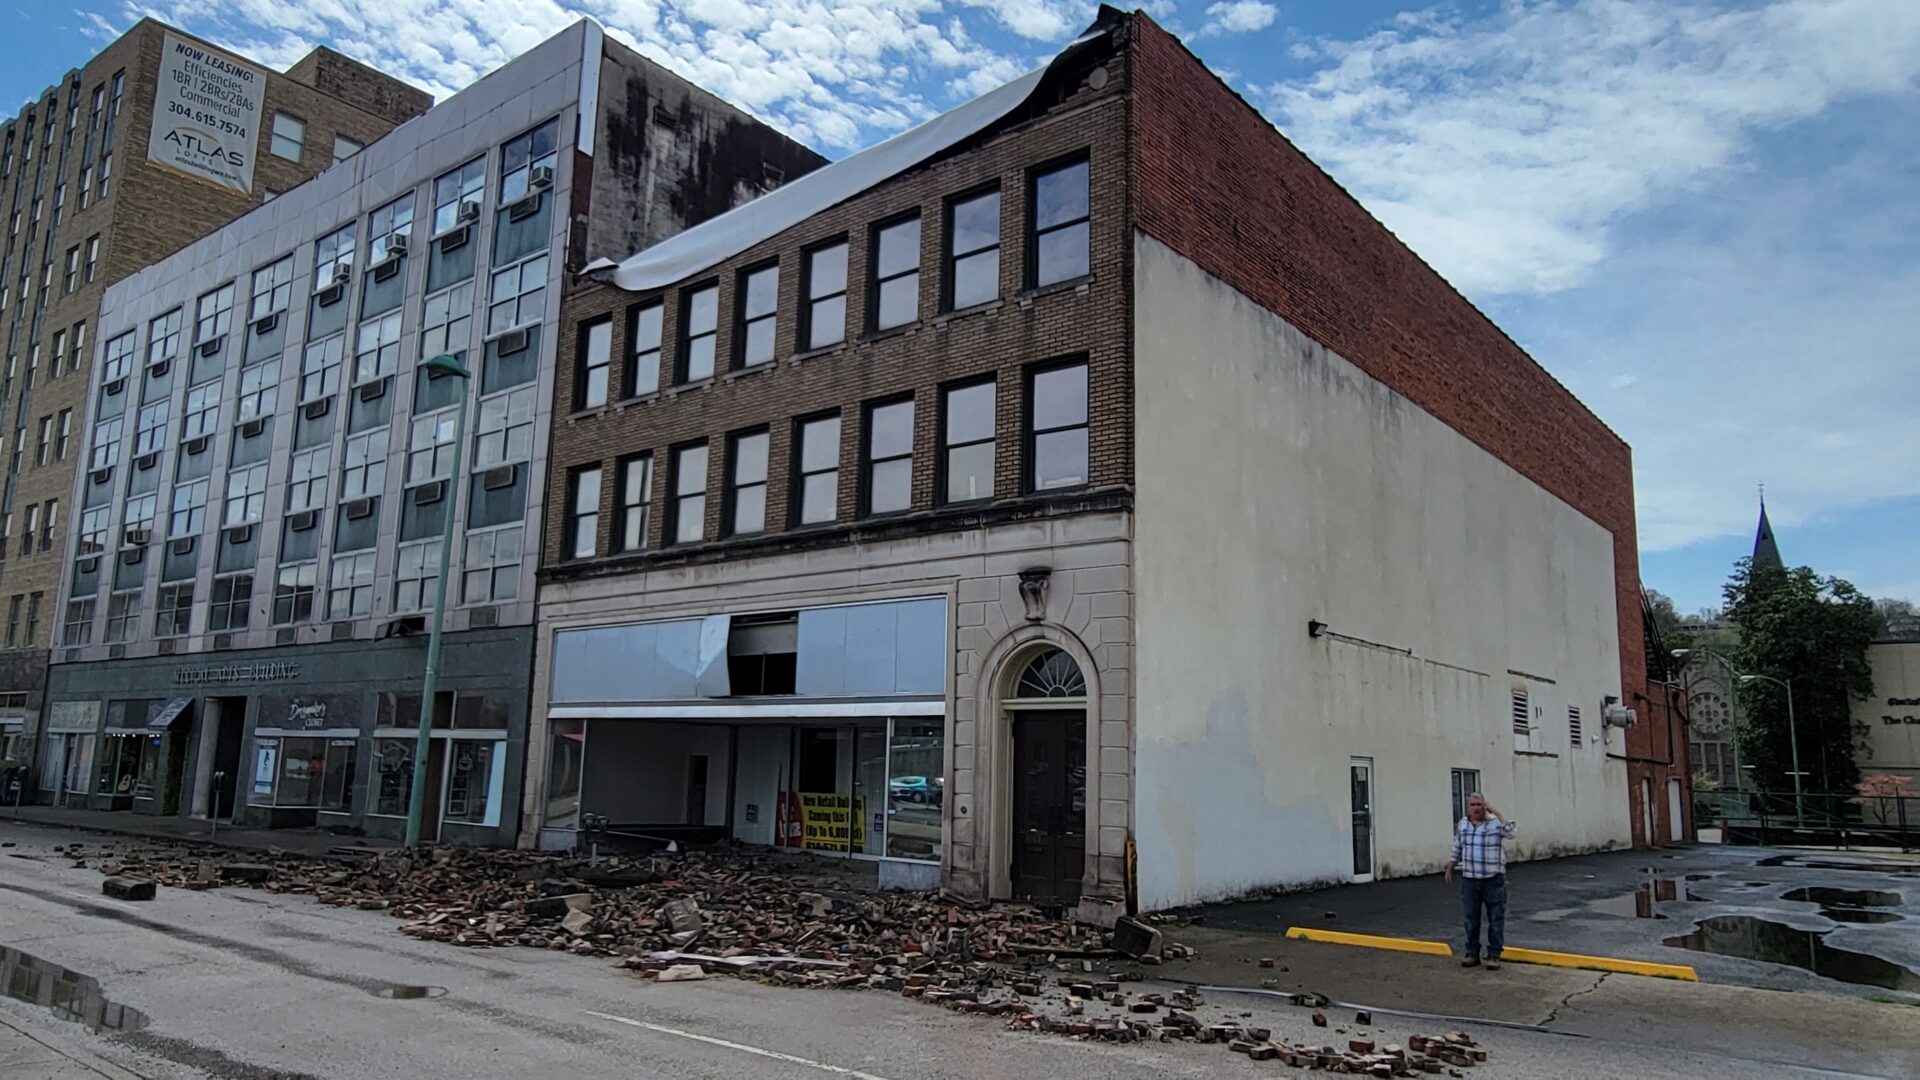 Crumbled bricks lie in the street in front of a damaged building in Charleston, West Virginia.